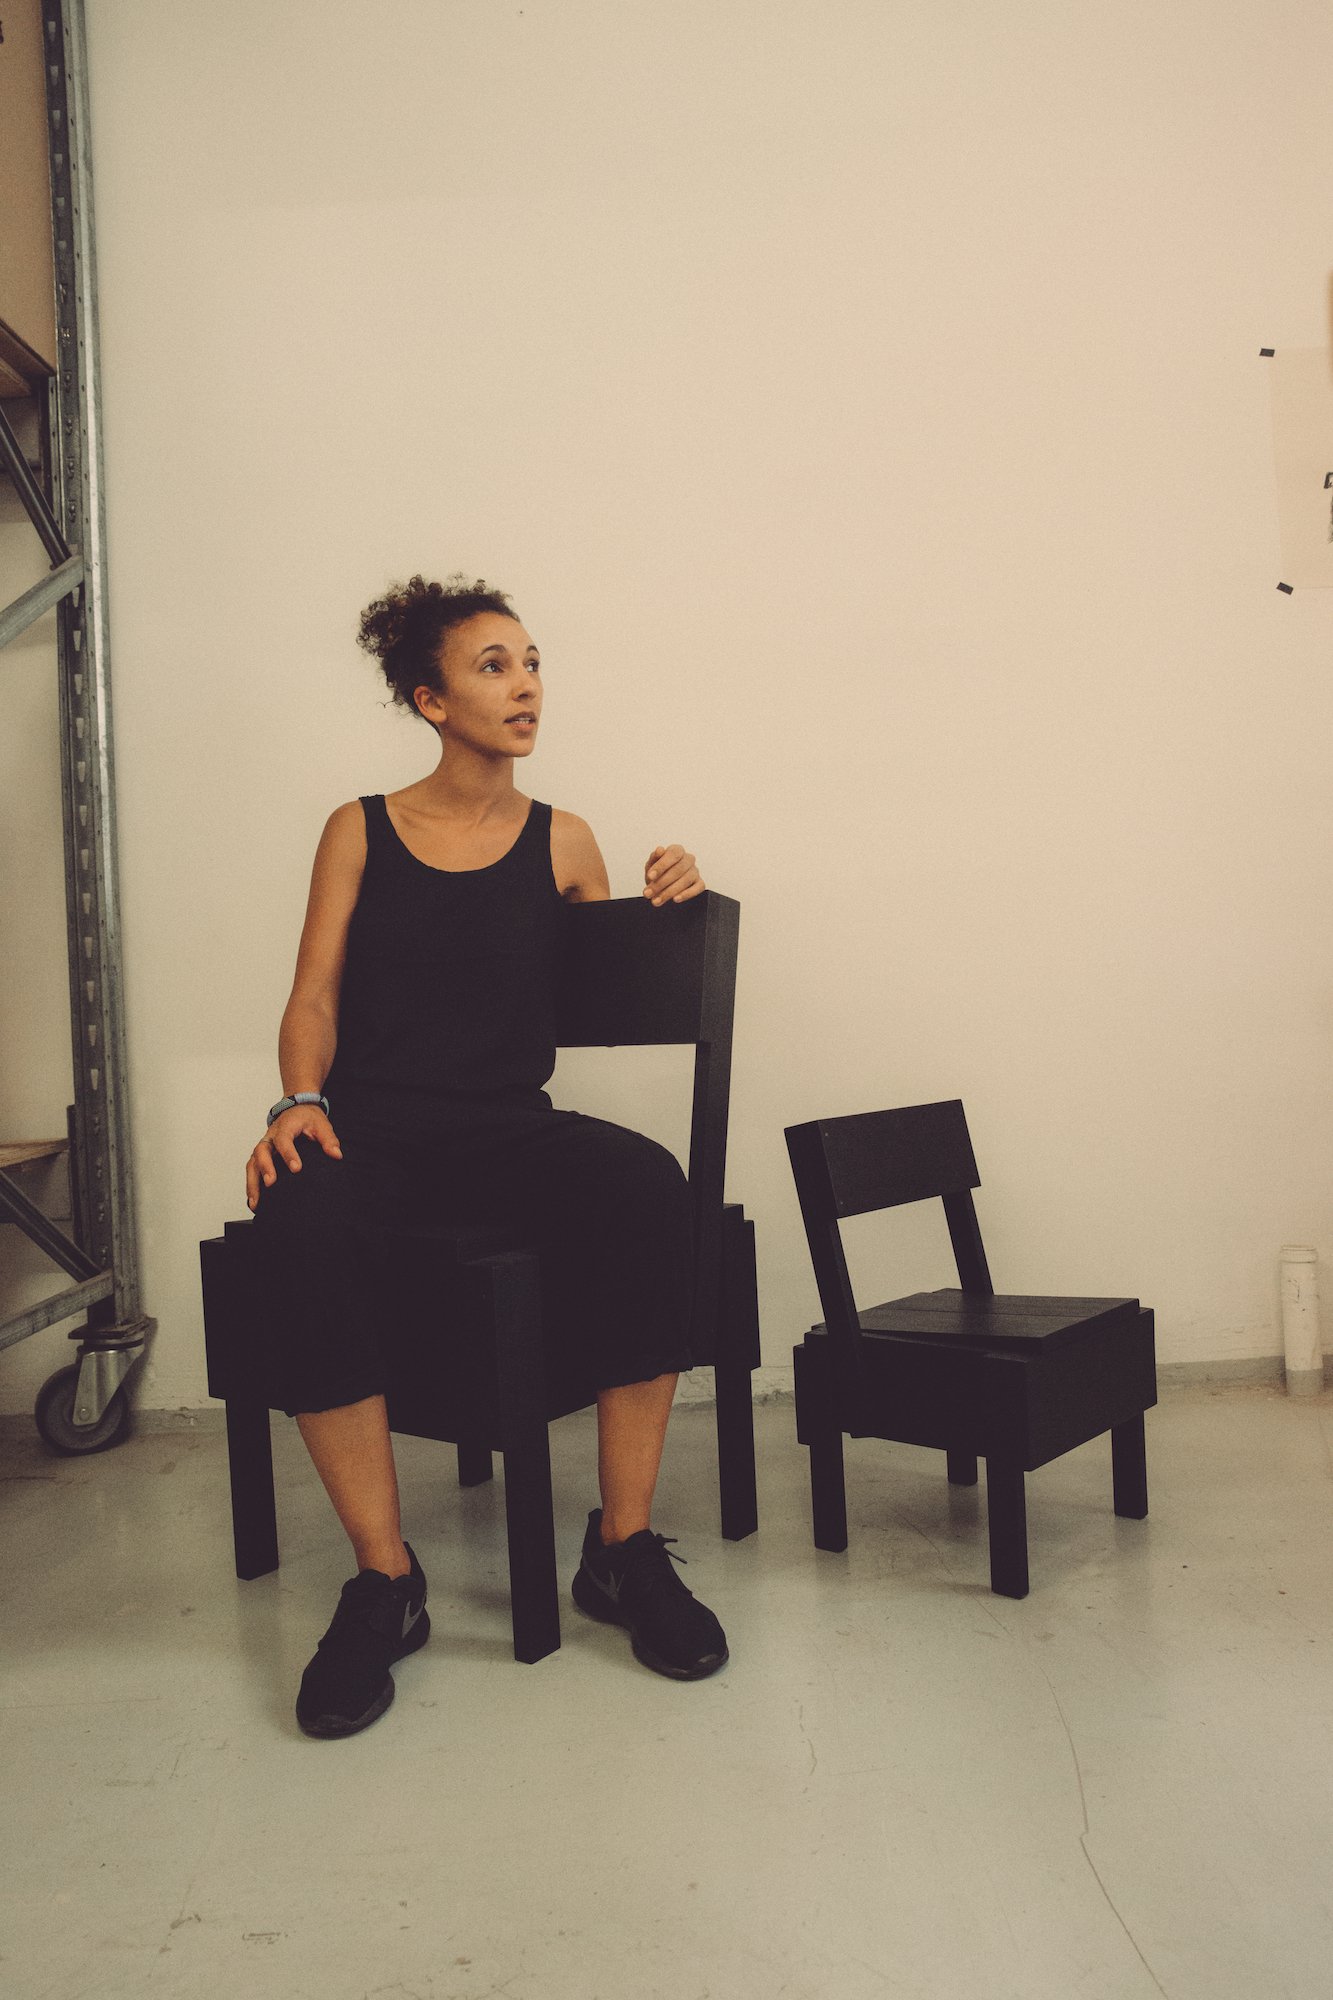  Corinna Sy, a designer and co-founder of Cucula, sitting on the black edition of Sedia Uno from Autoprogettazione – a piece designed by Enzo Mari and made by Cucula. Next to the Sedia Uno is the Bambinooo chair, also designed by Mari. 